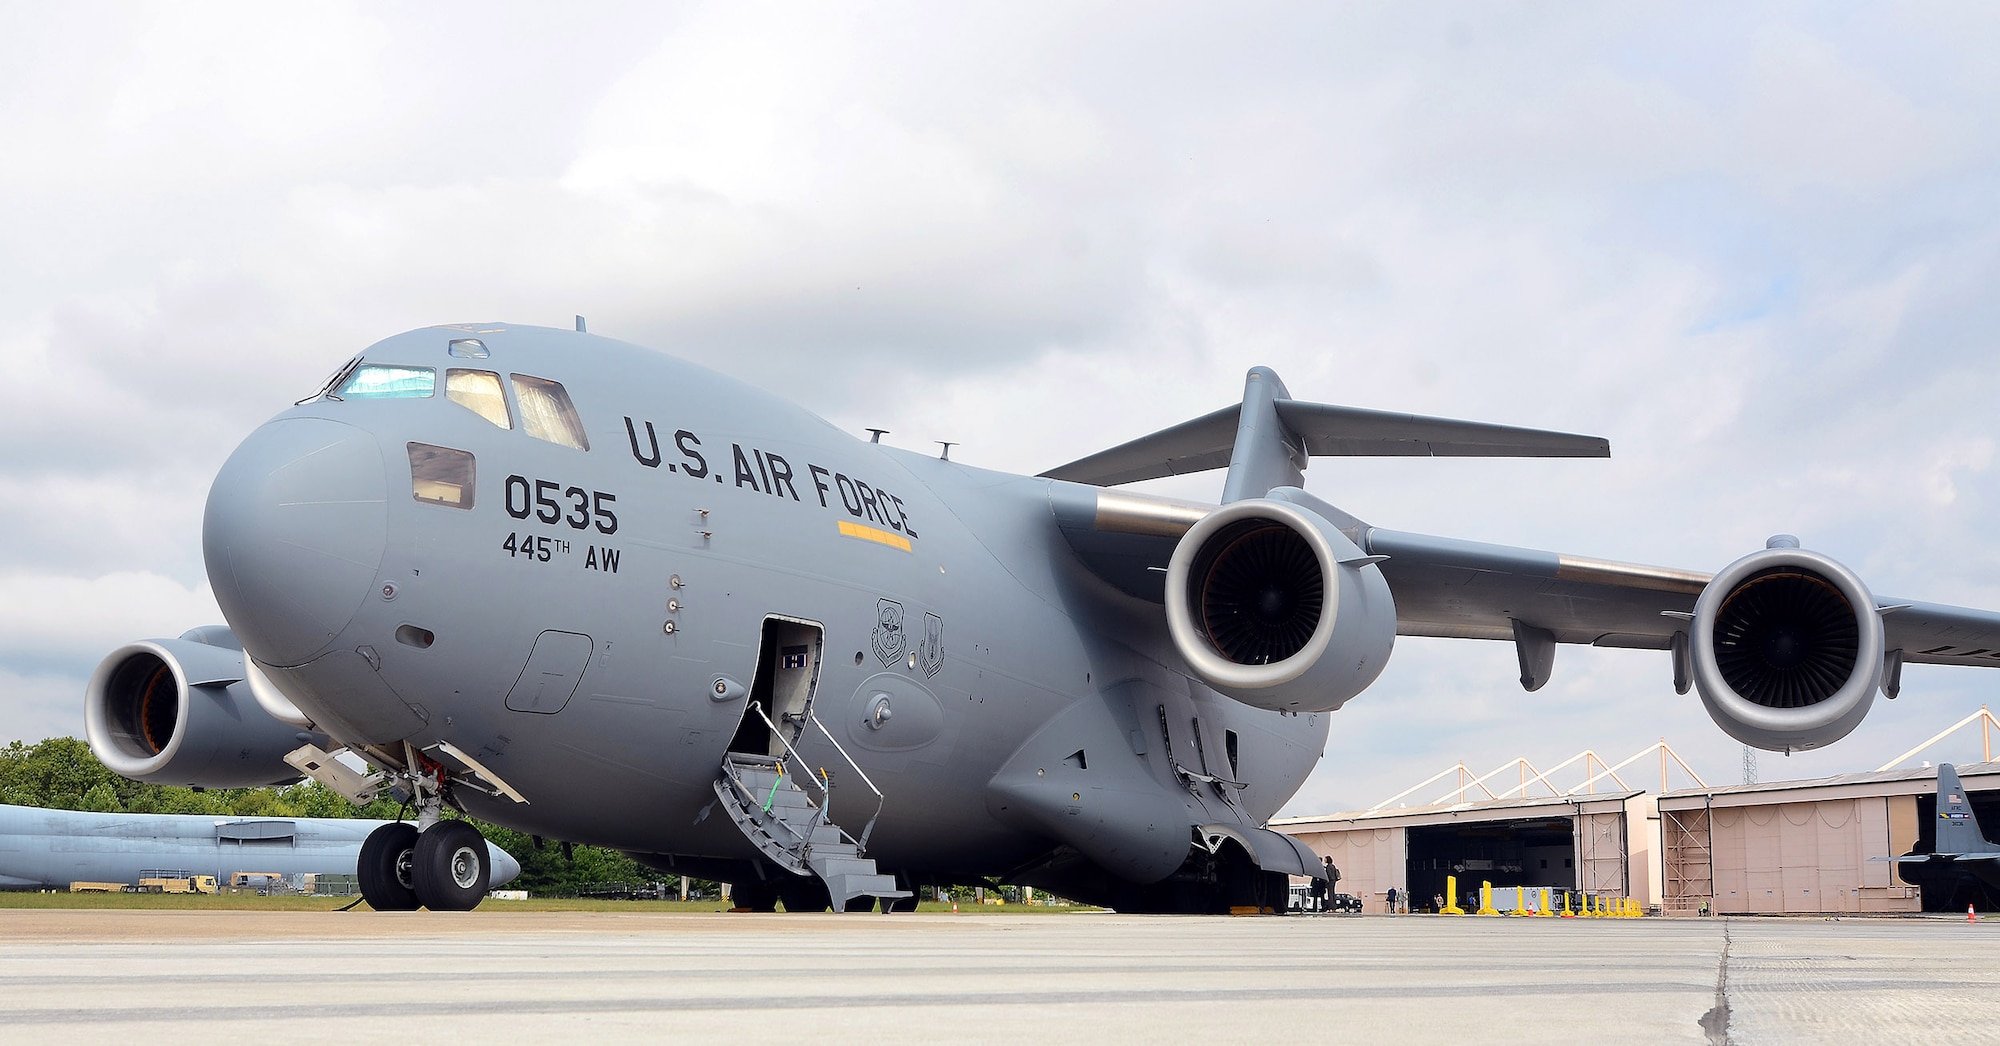 The second Containerized Biocontainment Systems unit is positioned on a U.S. Air Force C-17 to show how the unit could be airlifted to anywhere in the world if needed; Dobbins Air Reserve Base, Ga., Aug. 11, 2015. The two Containerized Biocontainment units were built by MRIGlobal through a partnership with the U.S. State Dept. and the Paul G. Allen Ebola Program and will be positioned at Dobbins ARB, ready for future. (U.S. Air Force photo/ Brad Fallin)